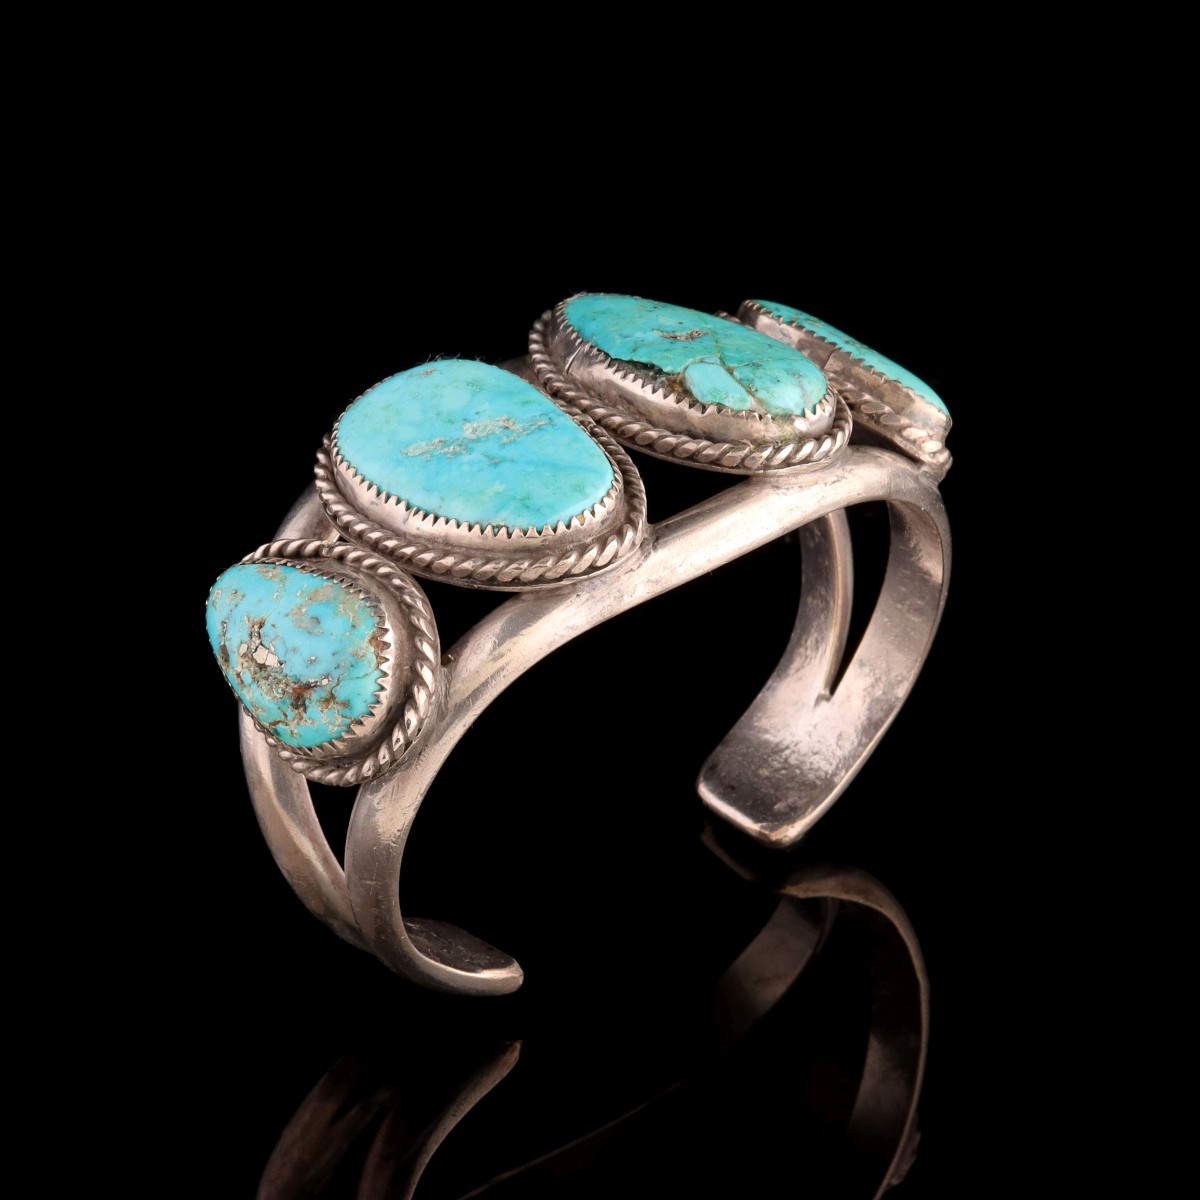 A MAN'S STERLING SILVER CUFF WITH LARGE TURQUOISE